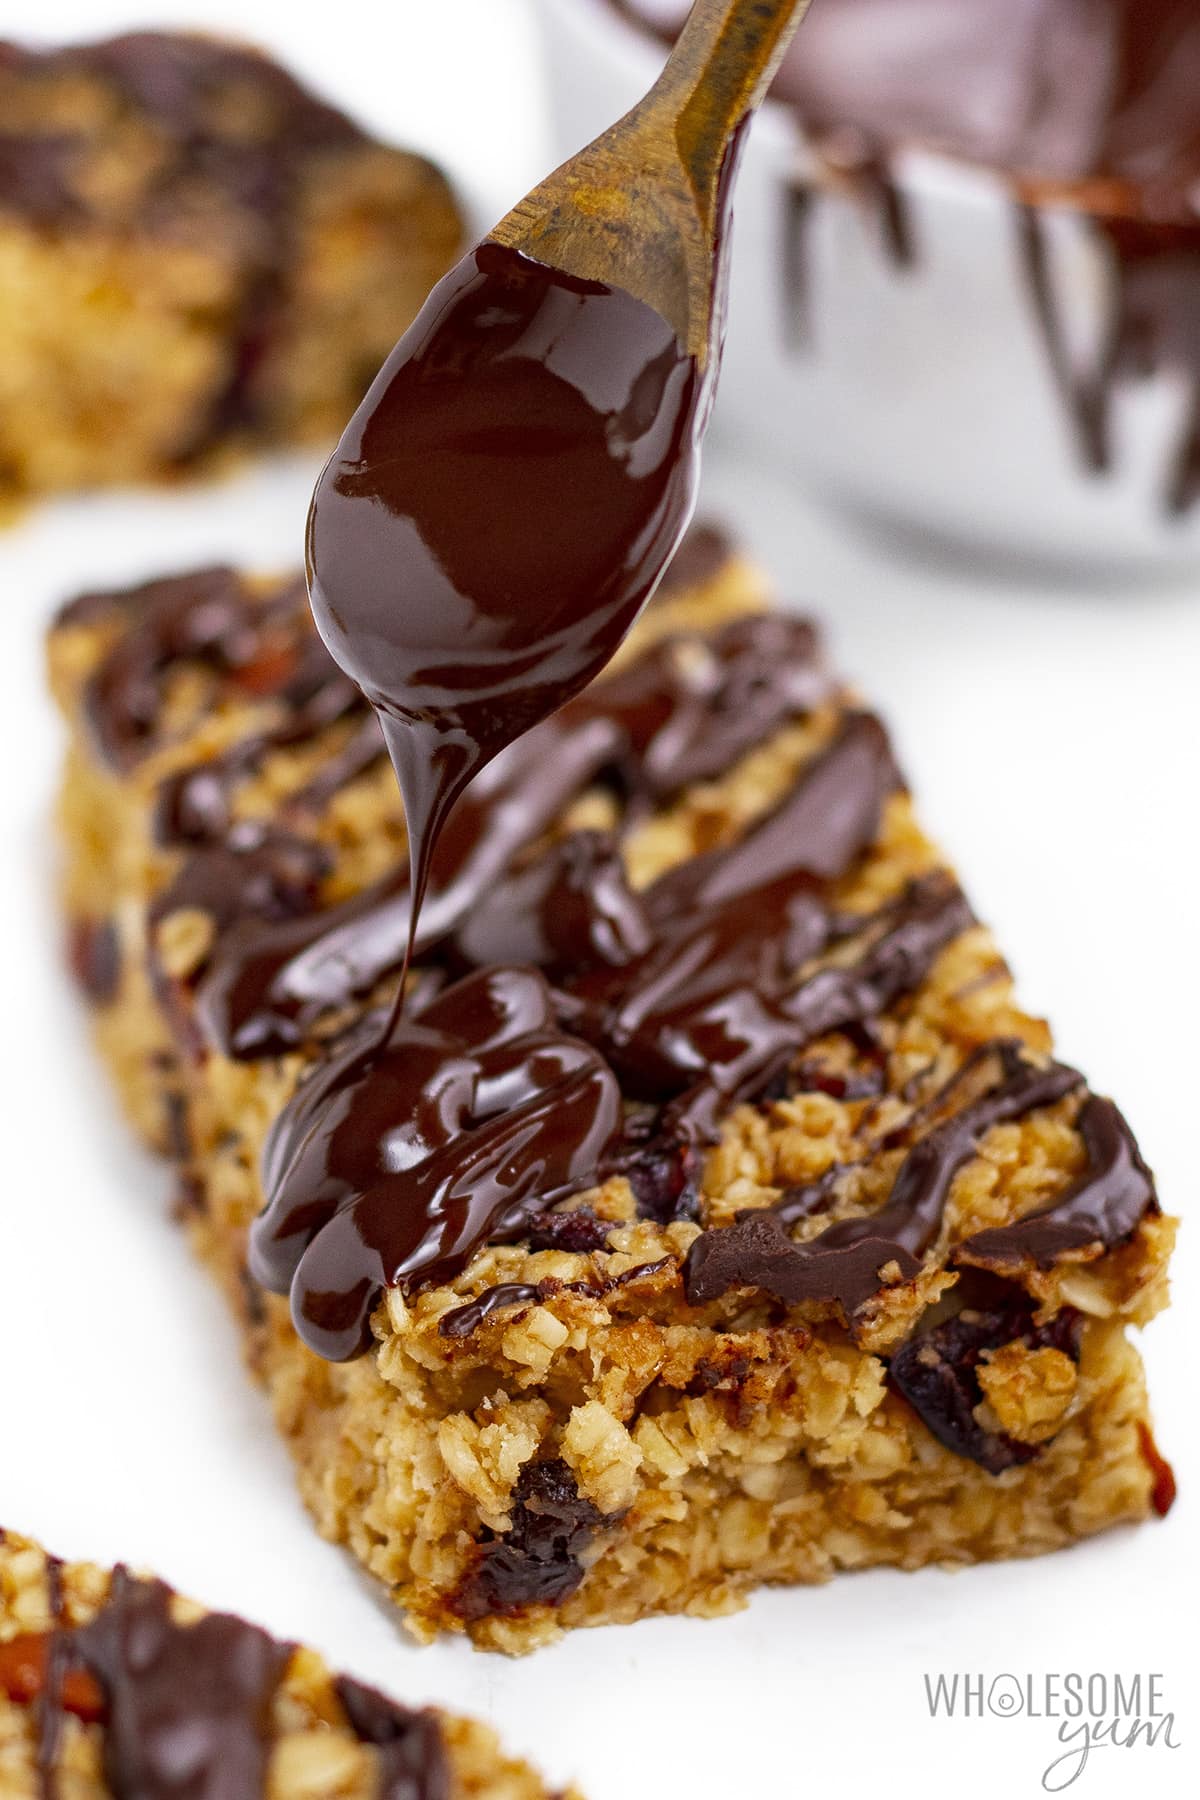 Chocolate drizzled over oatmeal breakfast bars.